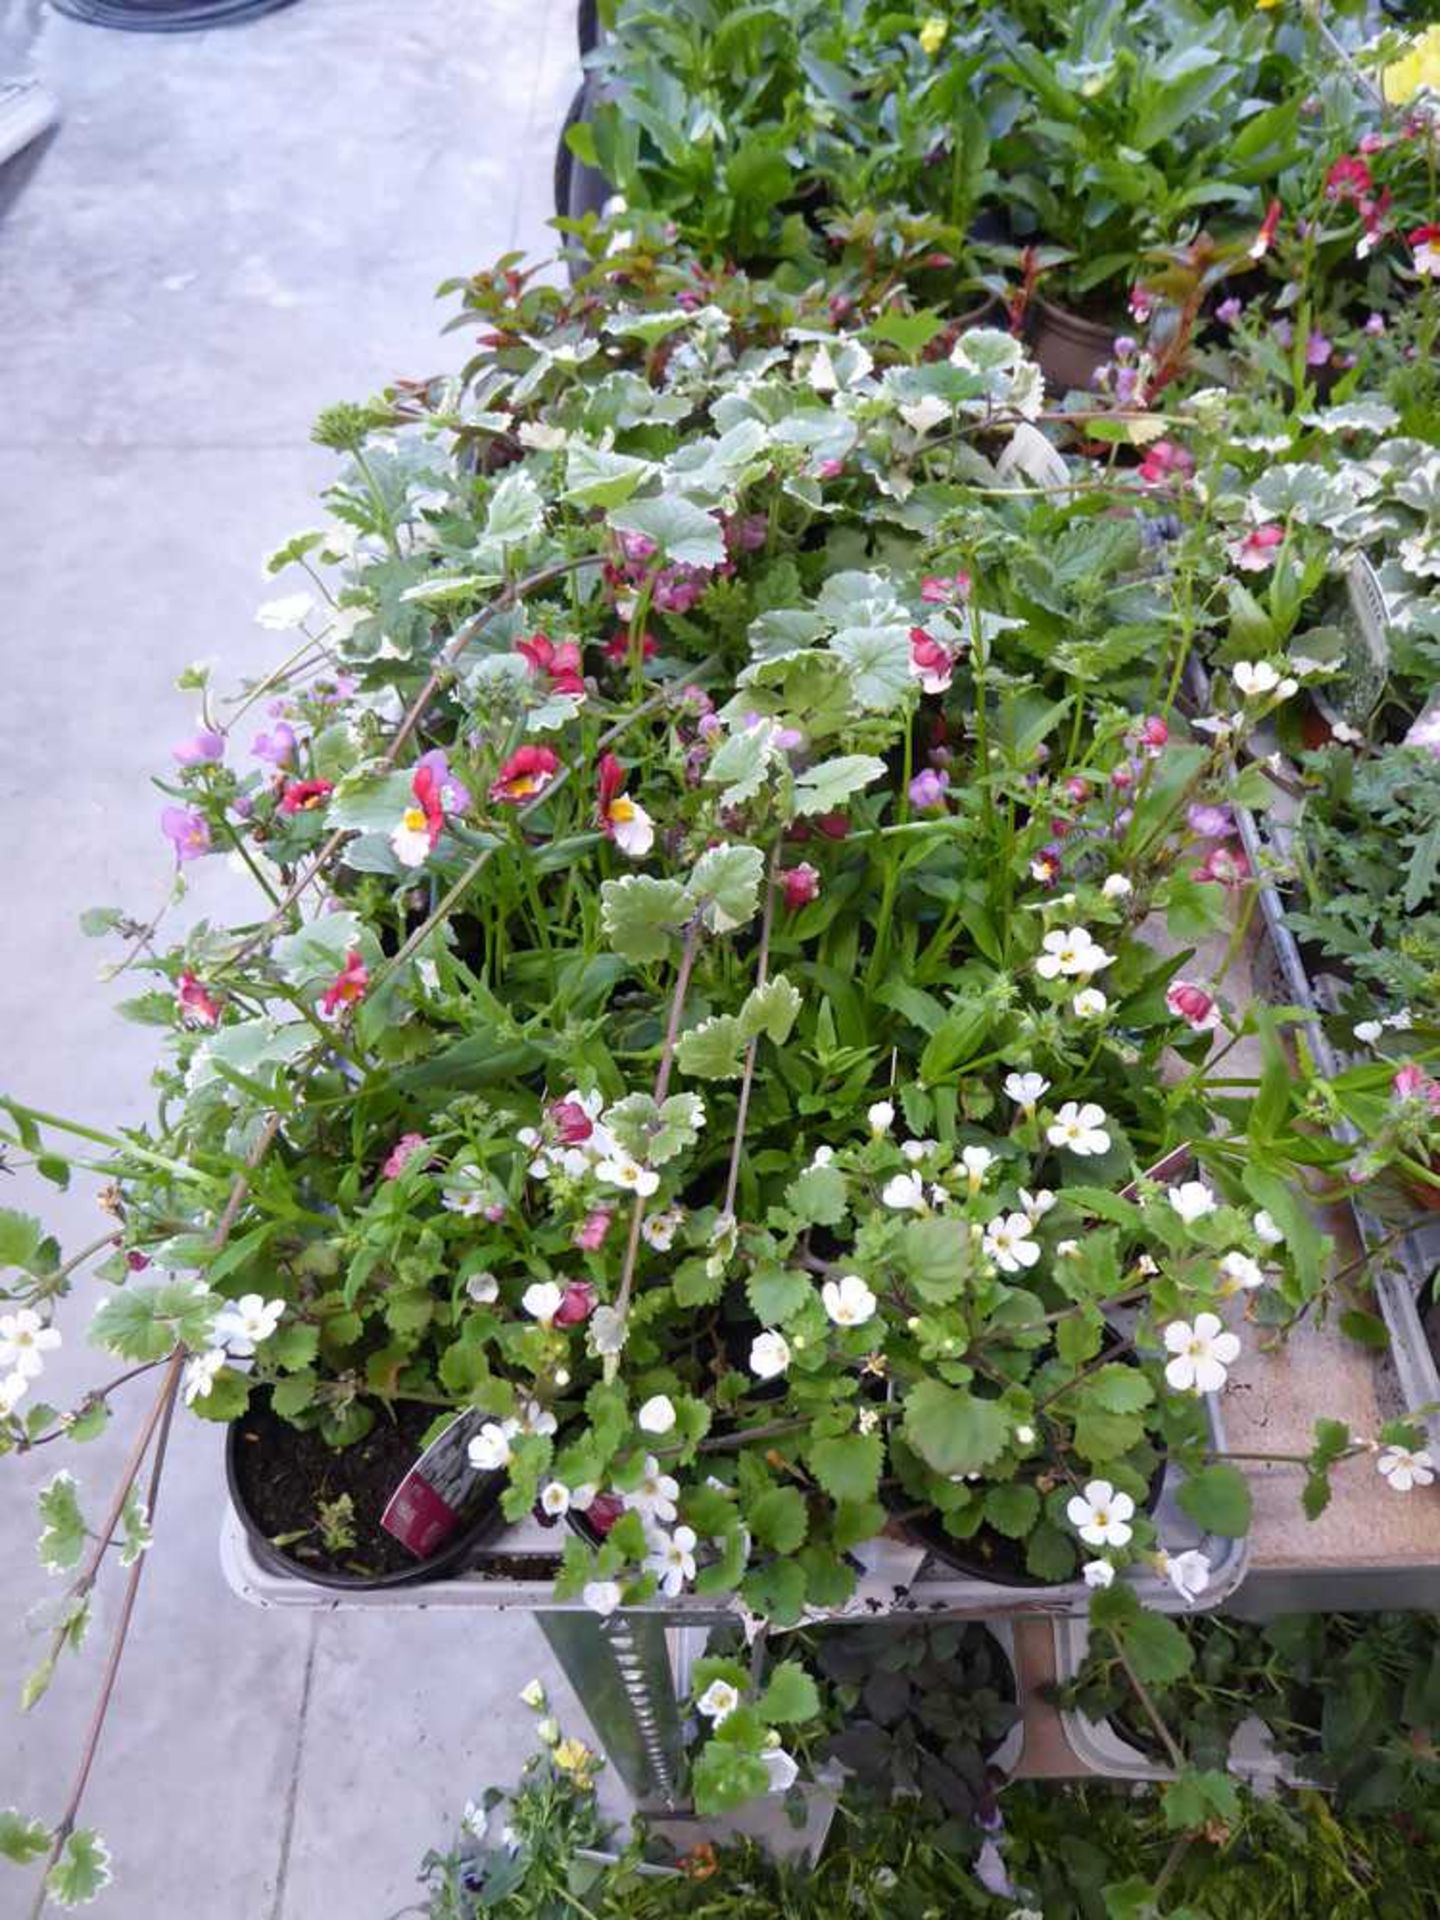 Tray of mixed basket plants